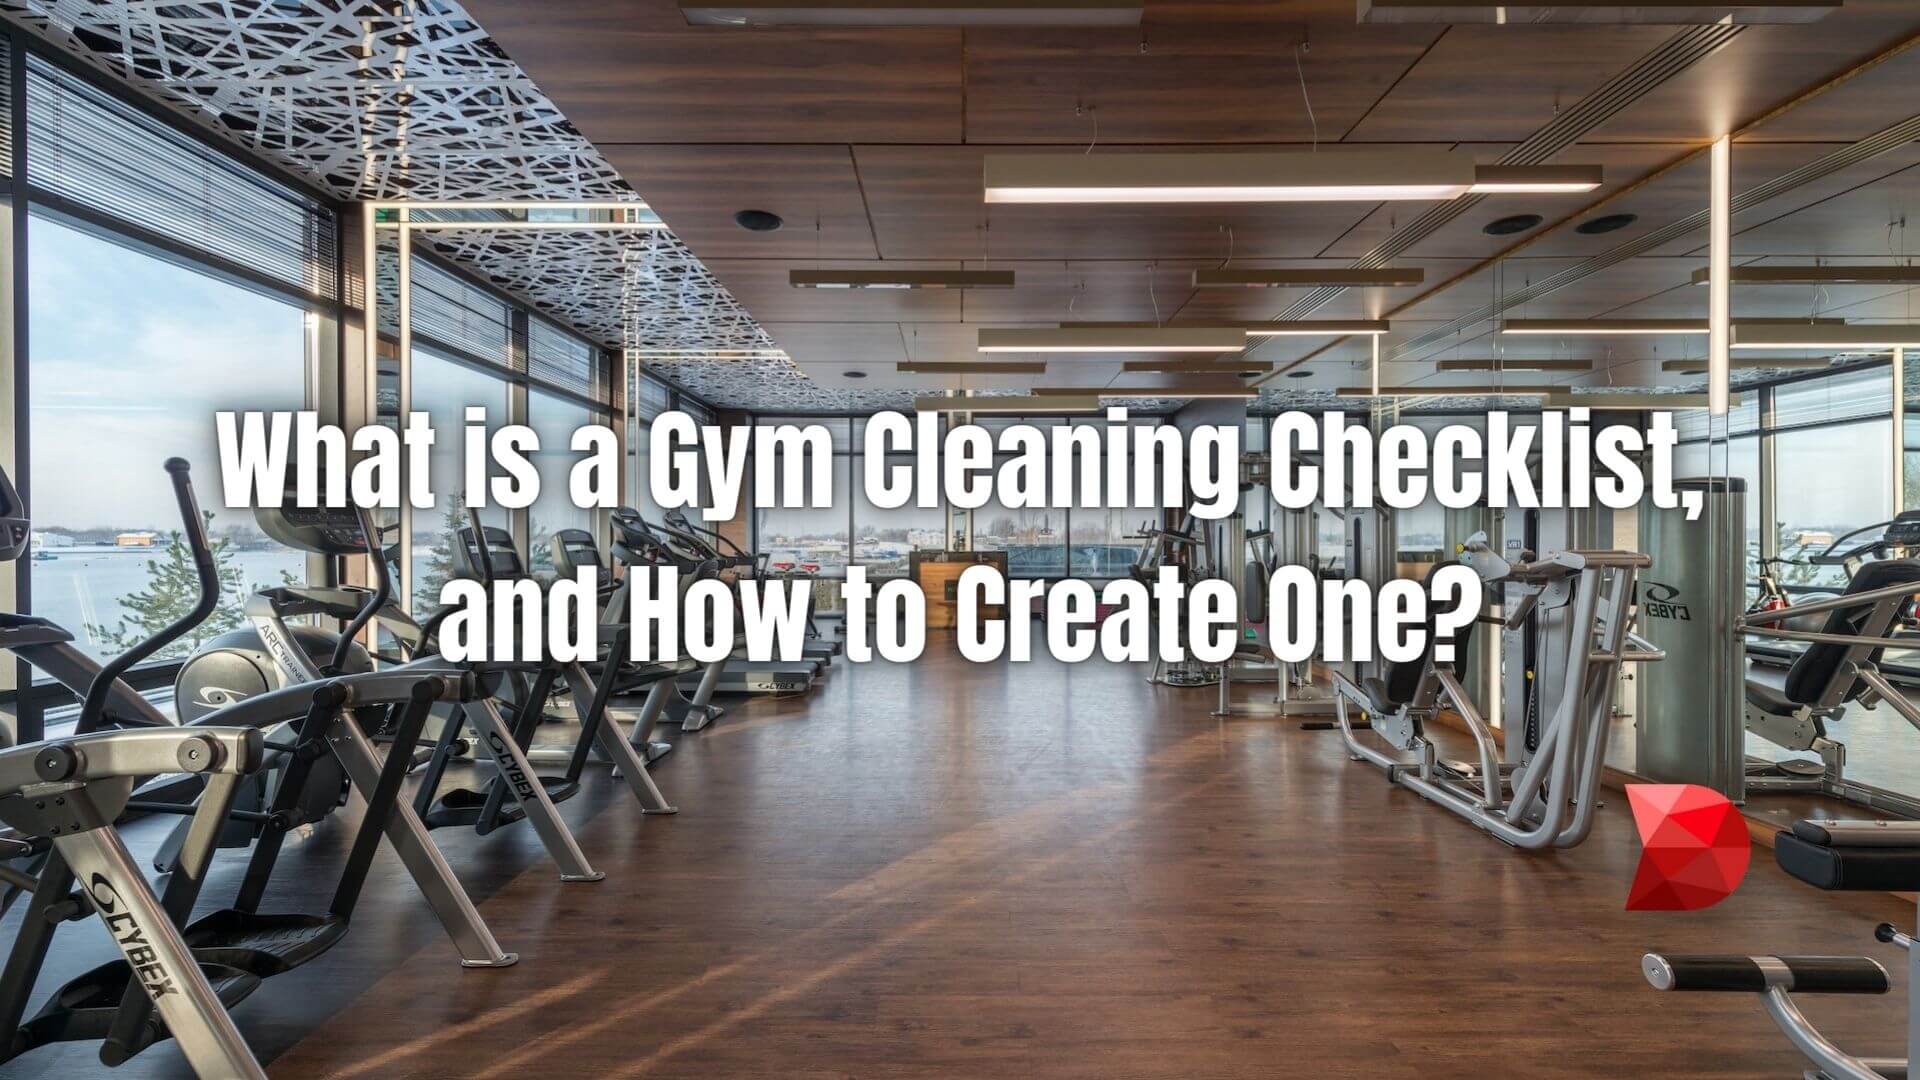 A gym cleaning checklist is a step-by-step guide designed to maintain the cleanliness and hygiene of a fitness center. Learn more!